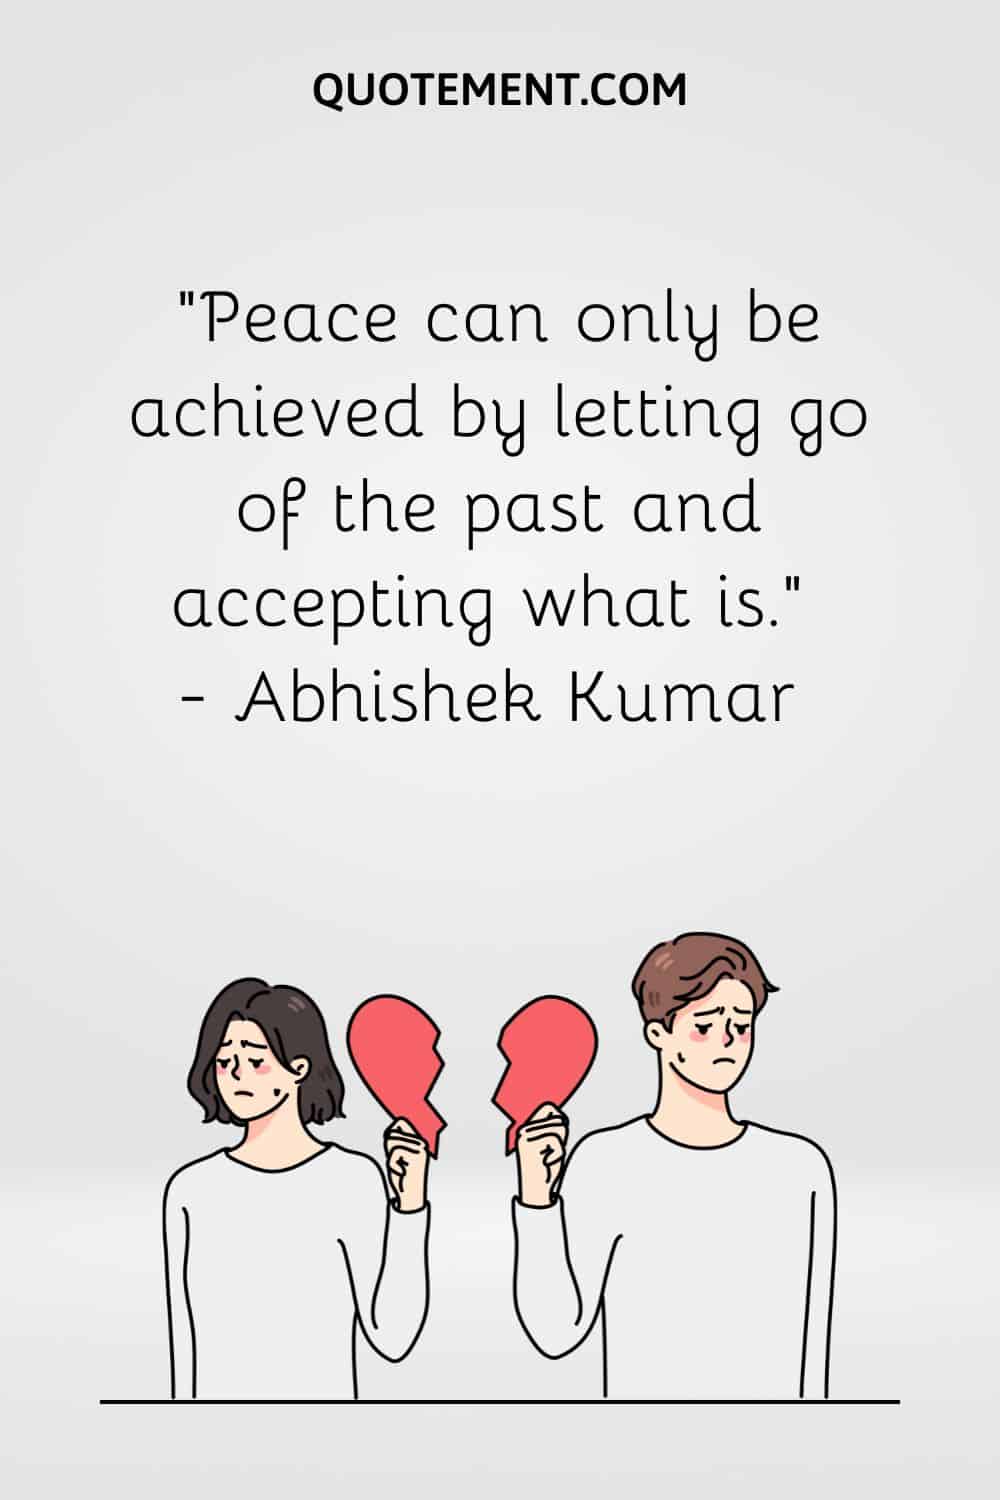 Peace can only be achieved by letting go of the past and accepting what is